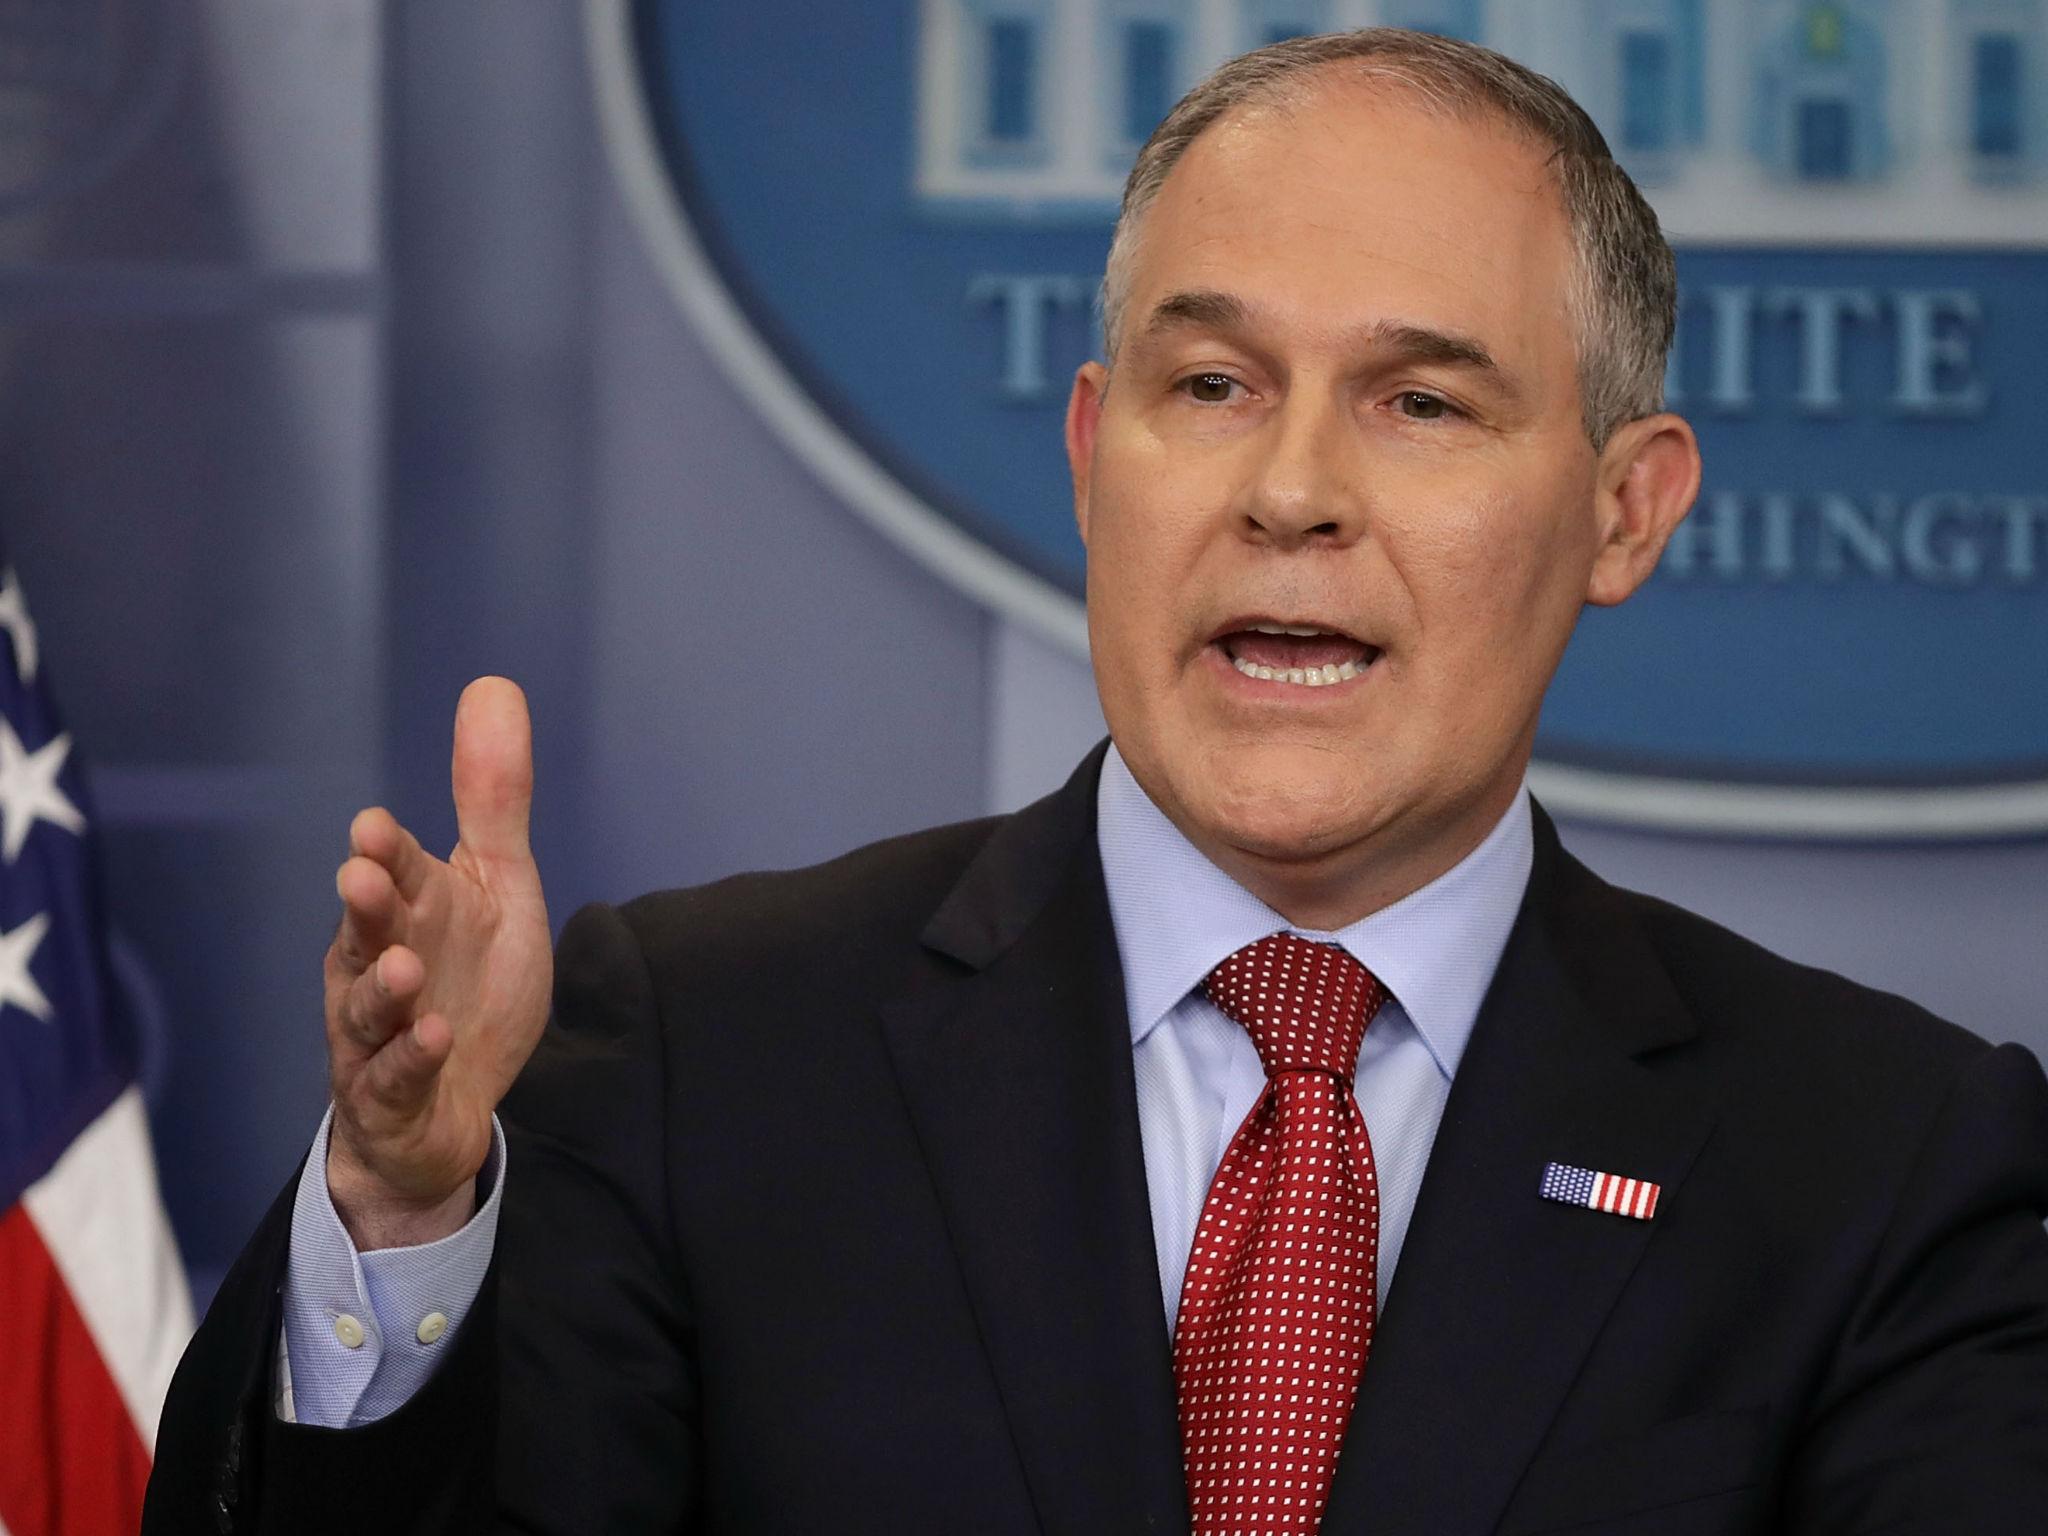 Environmental Protection Agency head Scott Pruitt said it is up to other countries to come to the negotiating table for a new global climate deal